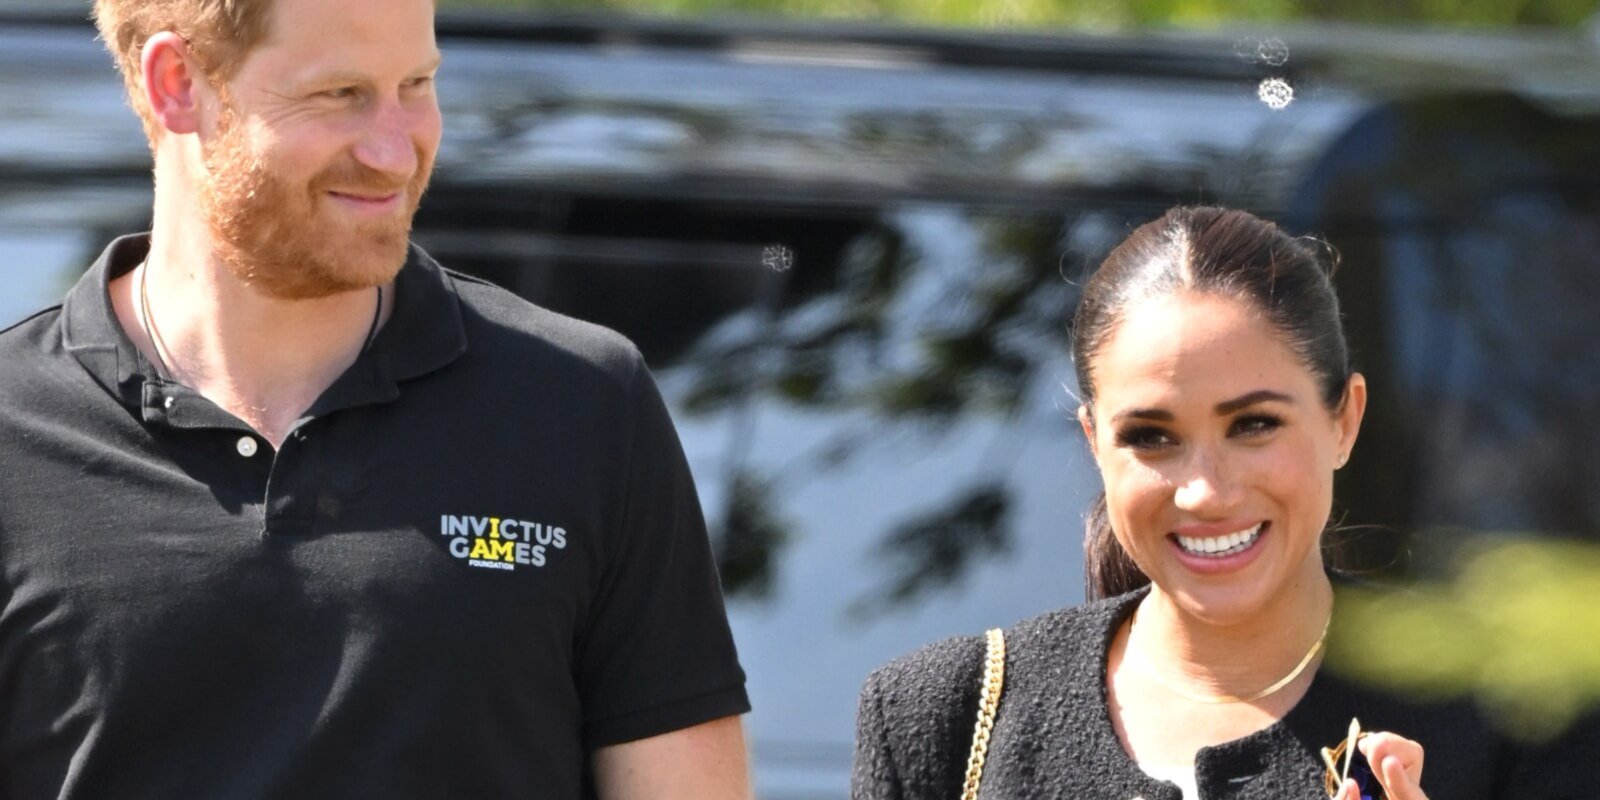 Prince Harry and Meghan Markle at the Invictus Games in 2022.